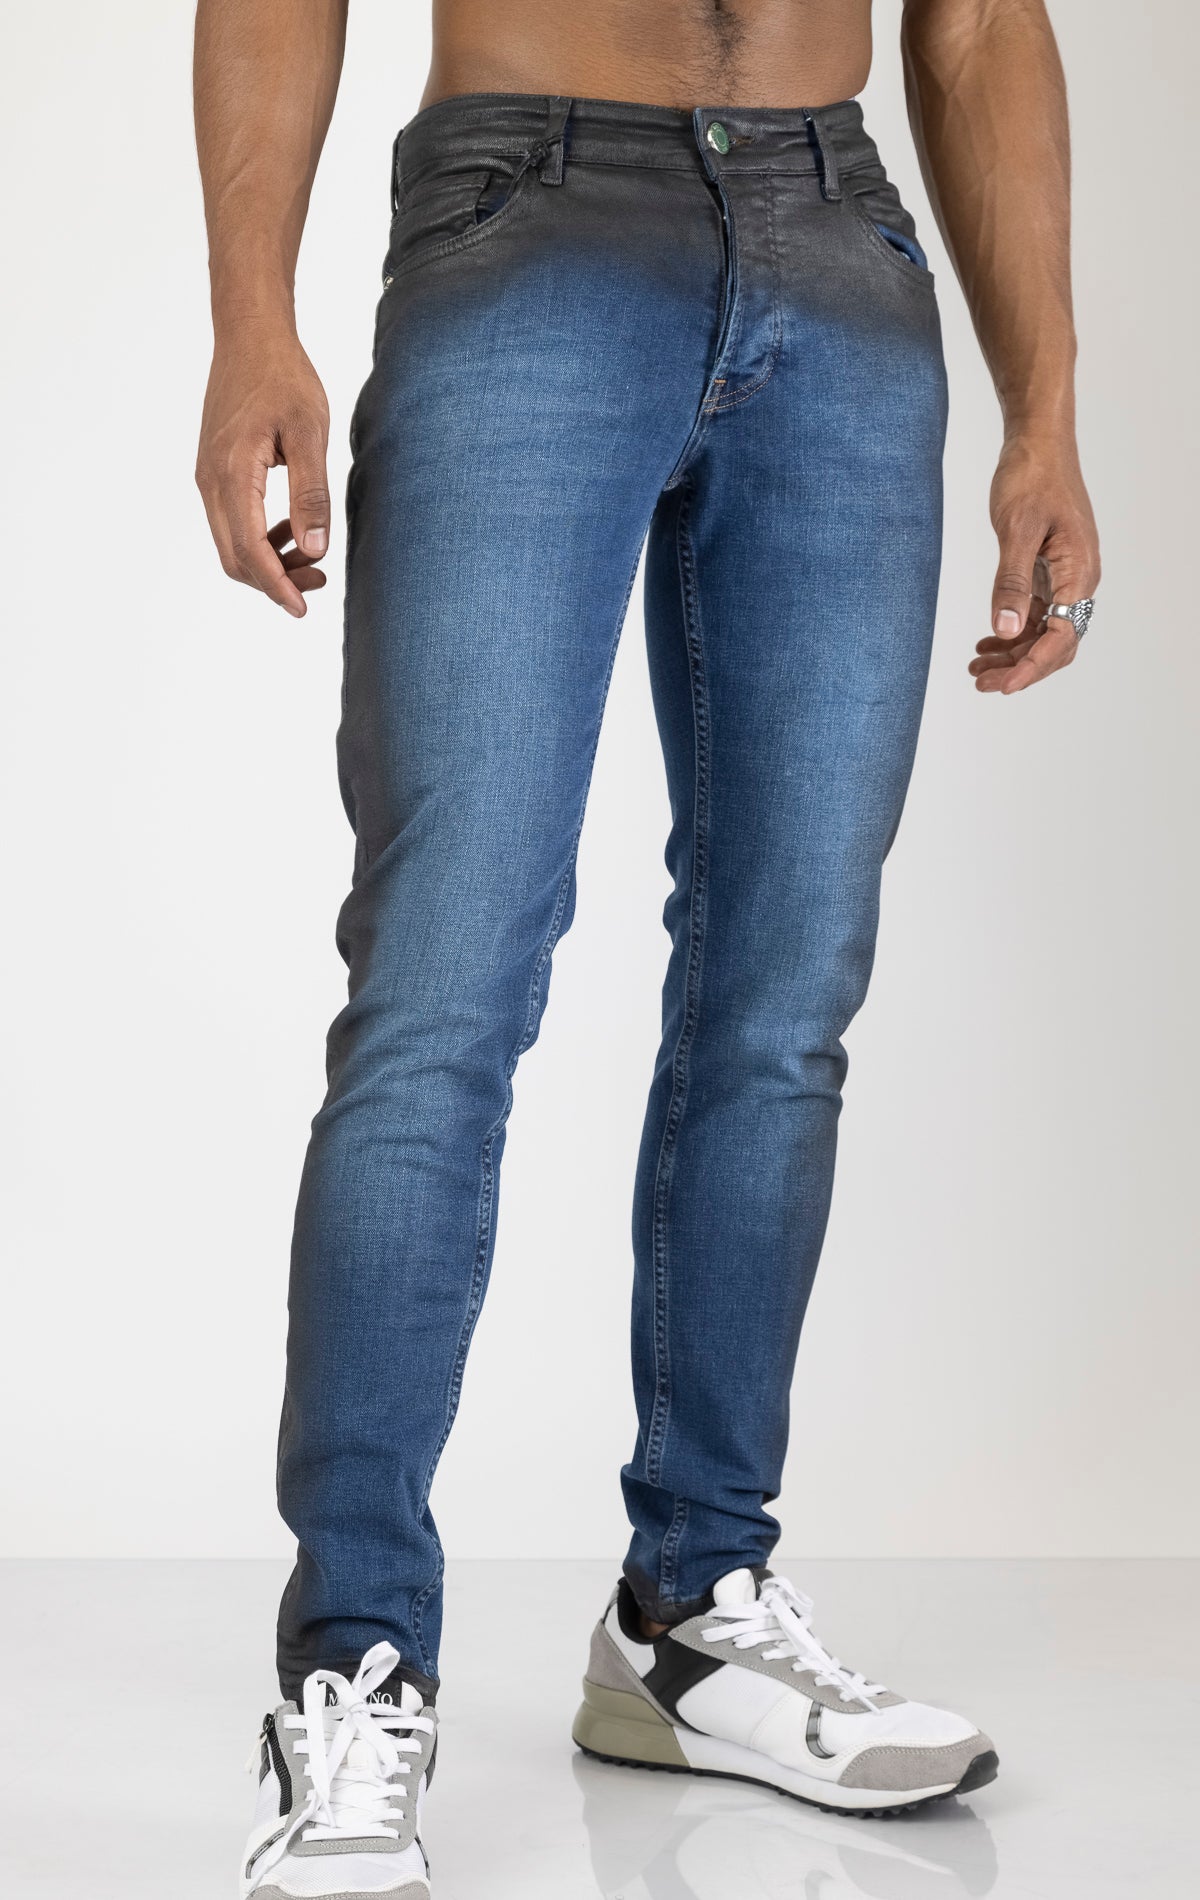 Men's side waxed tapered jeans in blue. The jeans are made from premium quality denim (98% cotton, 2% lycra) and feature a tailored fit, meticulously applied waxed detailing along the side seams, and a tapered leg.